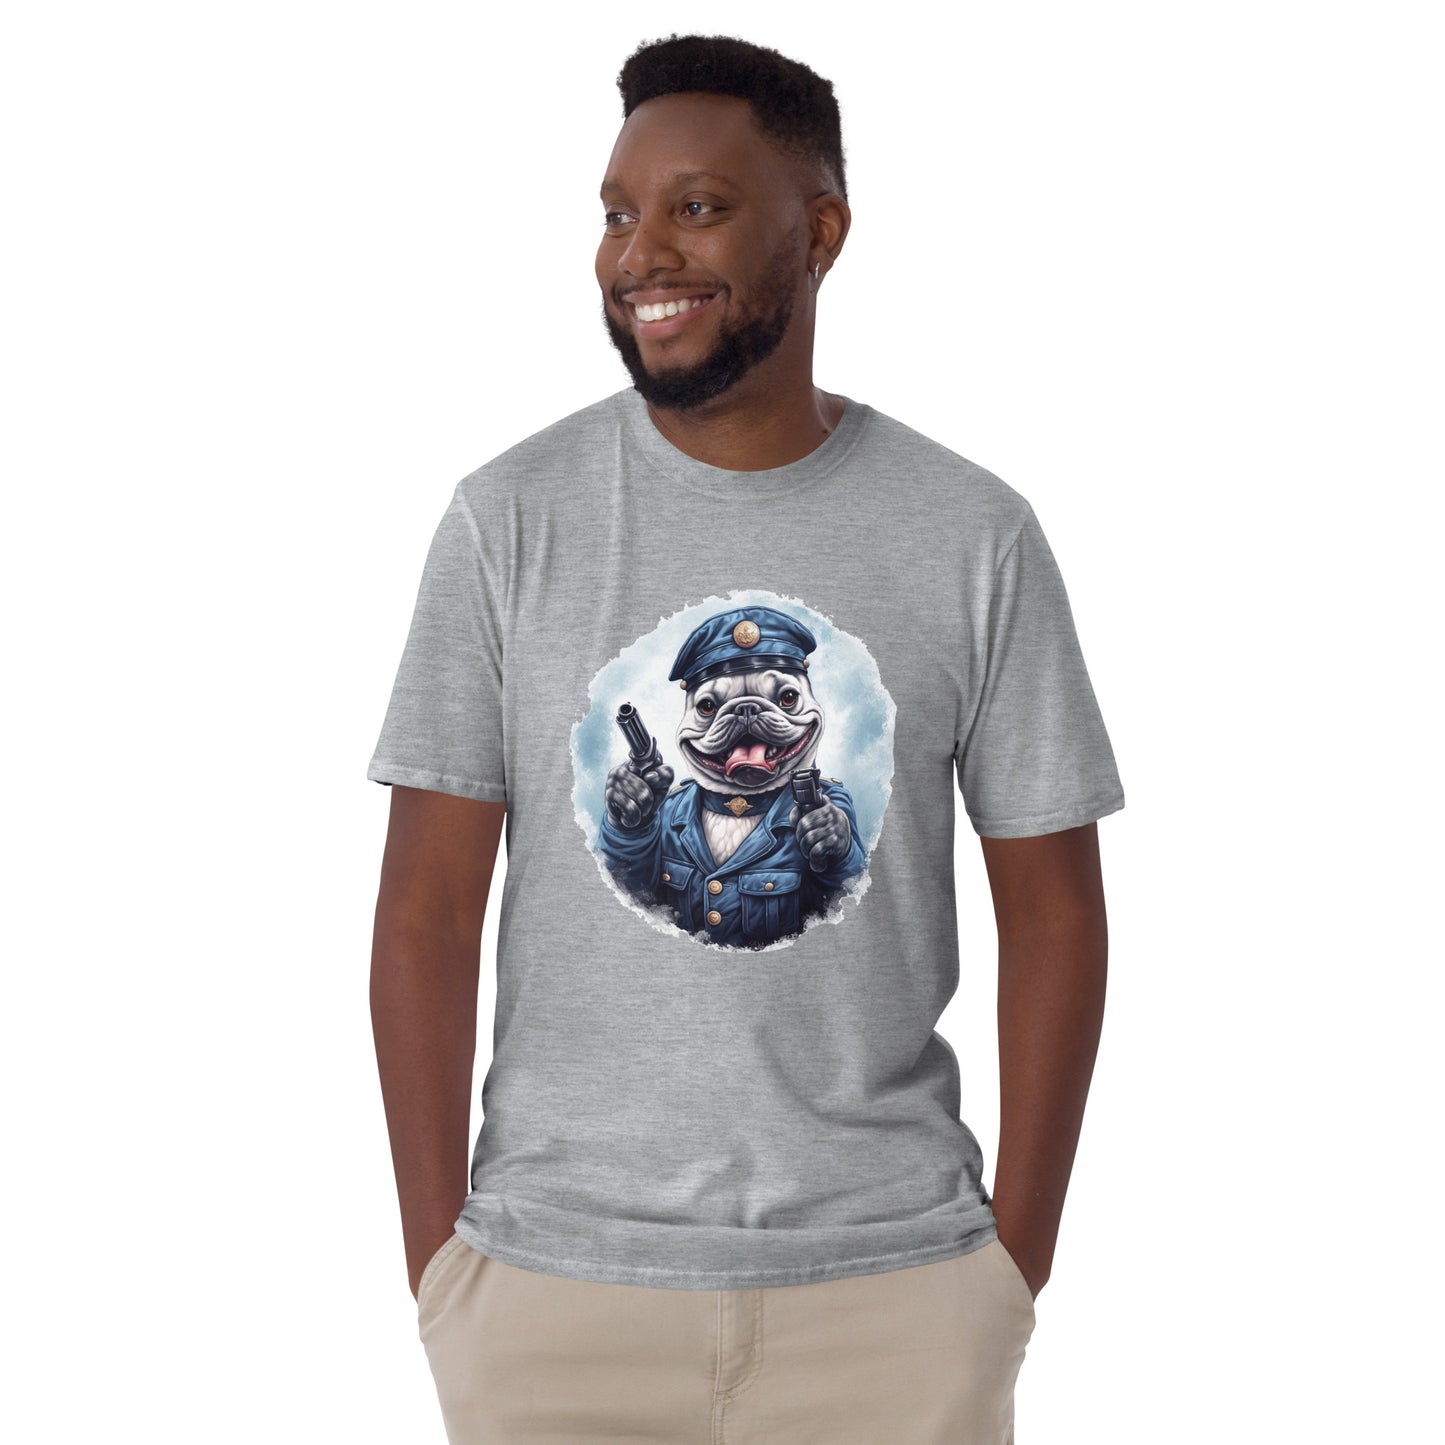 Policeman Frenchie T-Shirt - Mixing Law Enforcement with Canine Charm